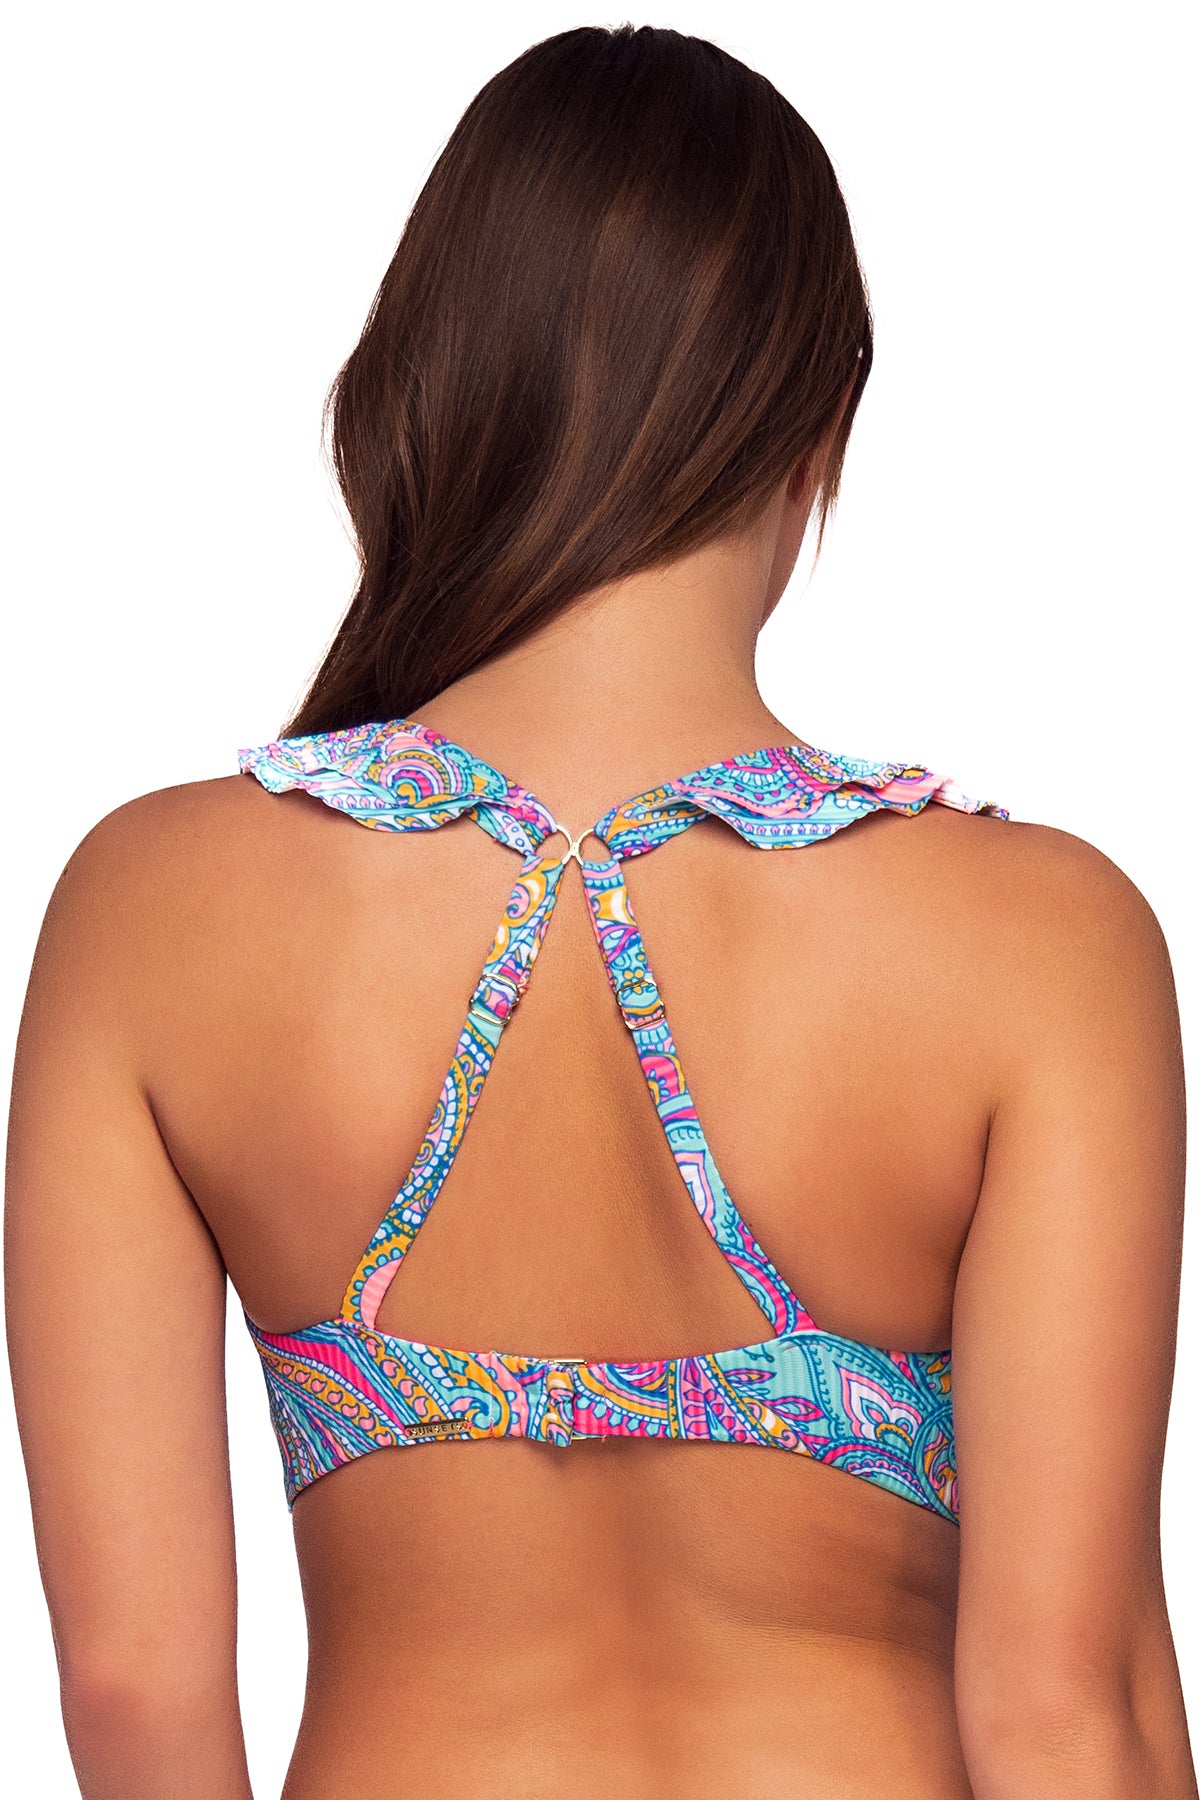 Back view of Sunsets Paisley Pop Willa Wireless Top showing crossback straps